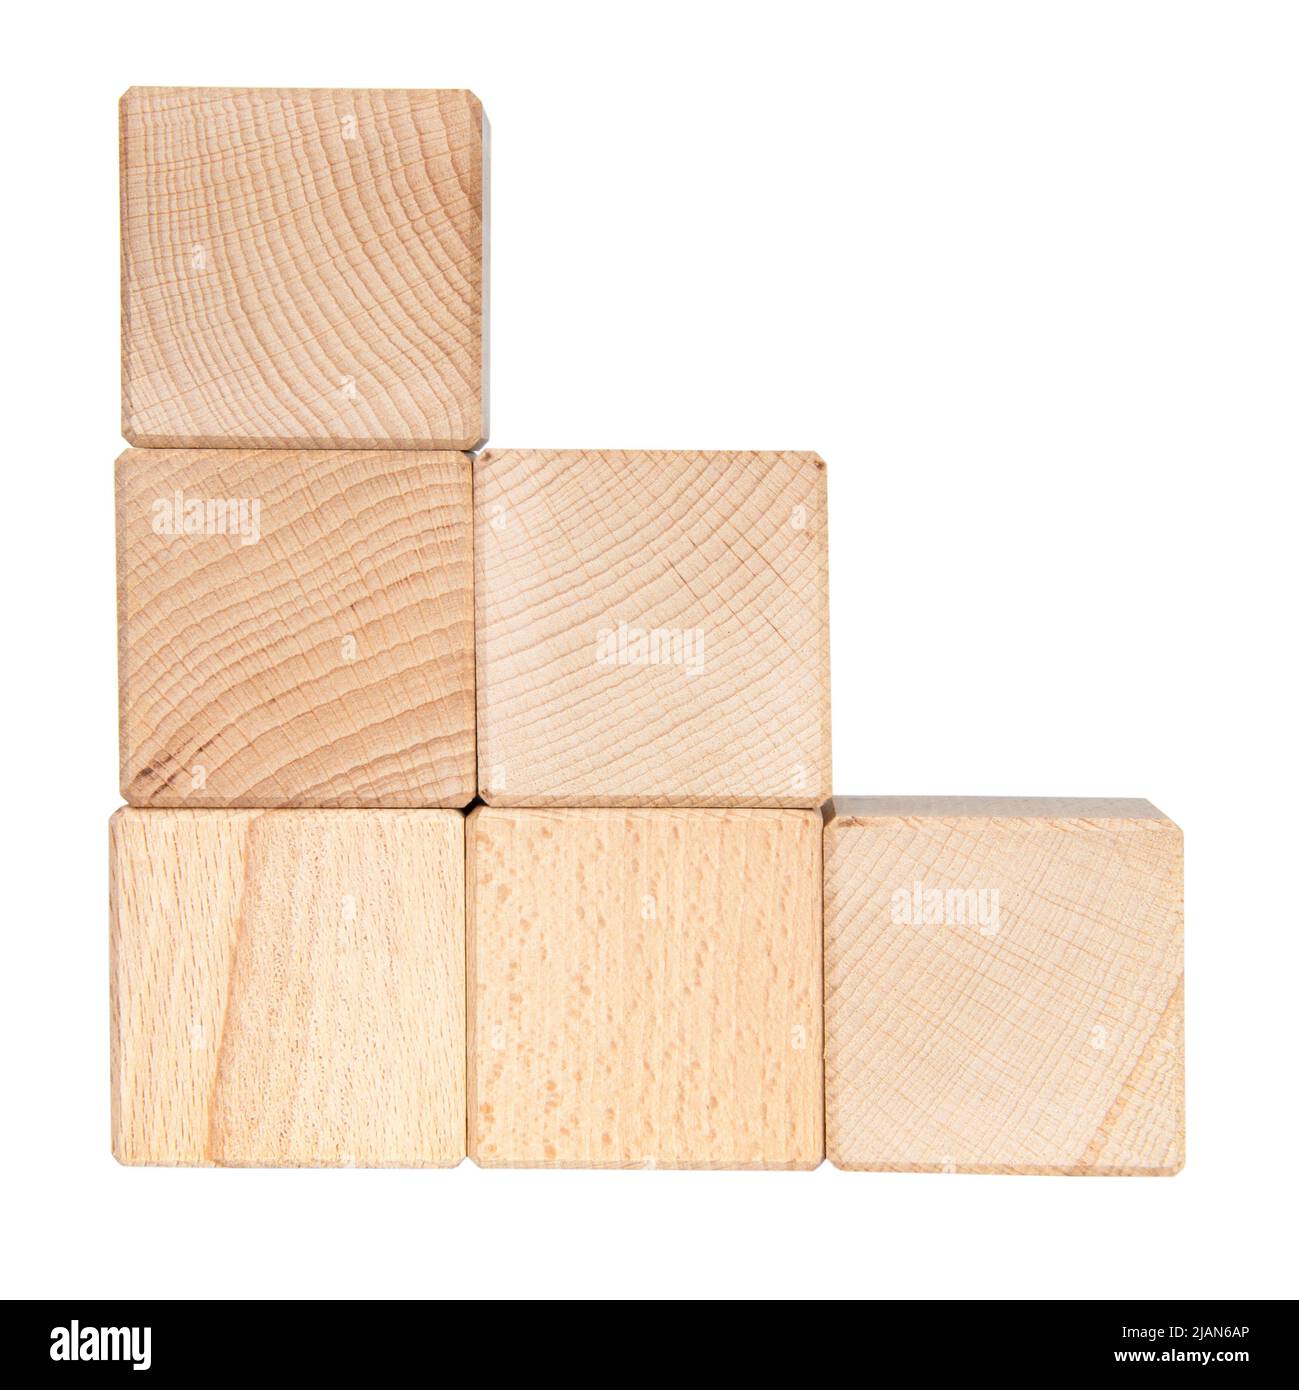 Wooden cubes brick construction for creative text isolated on the white background Stock Photo